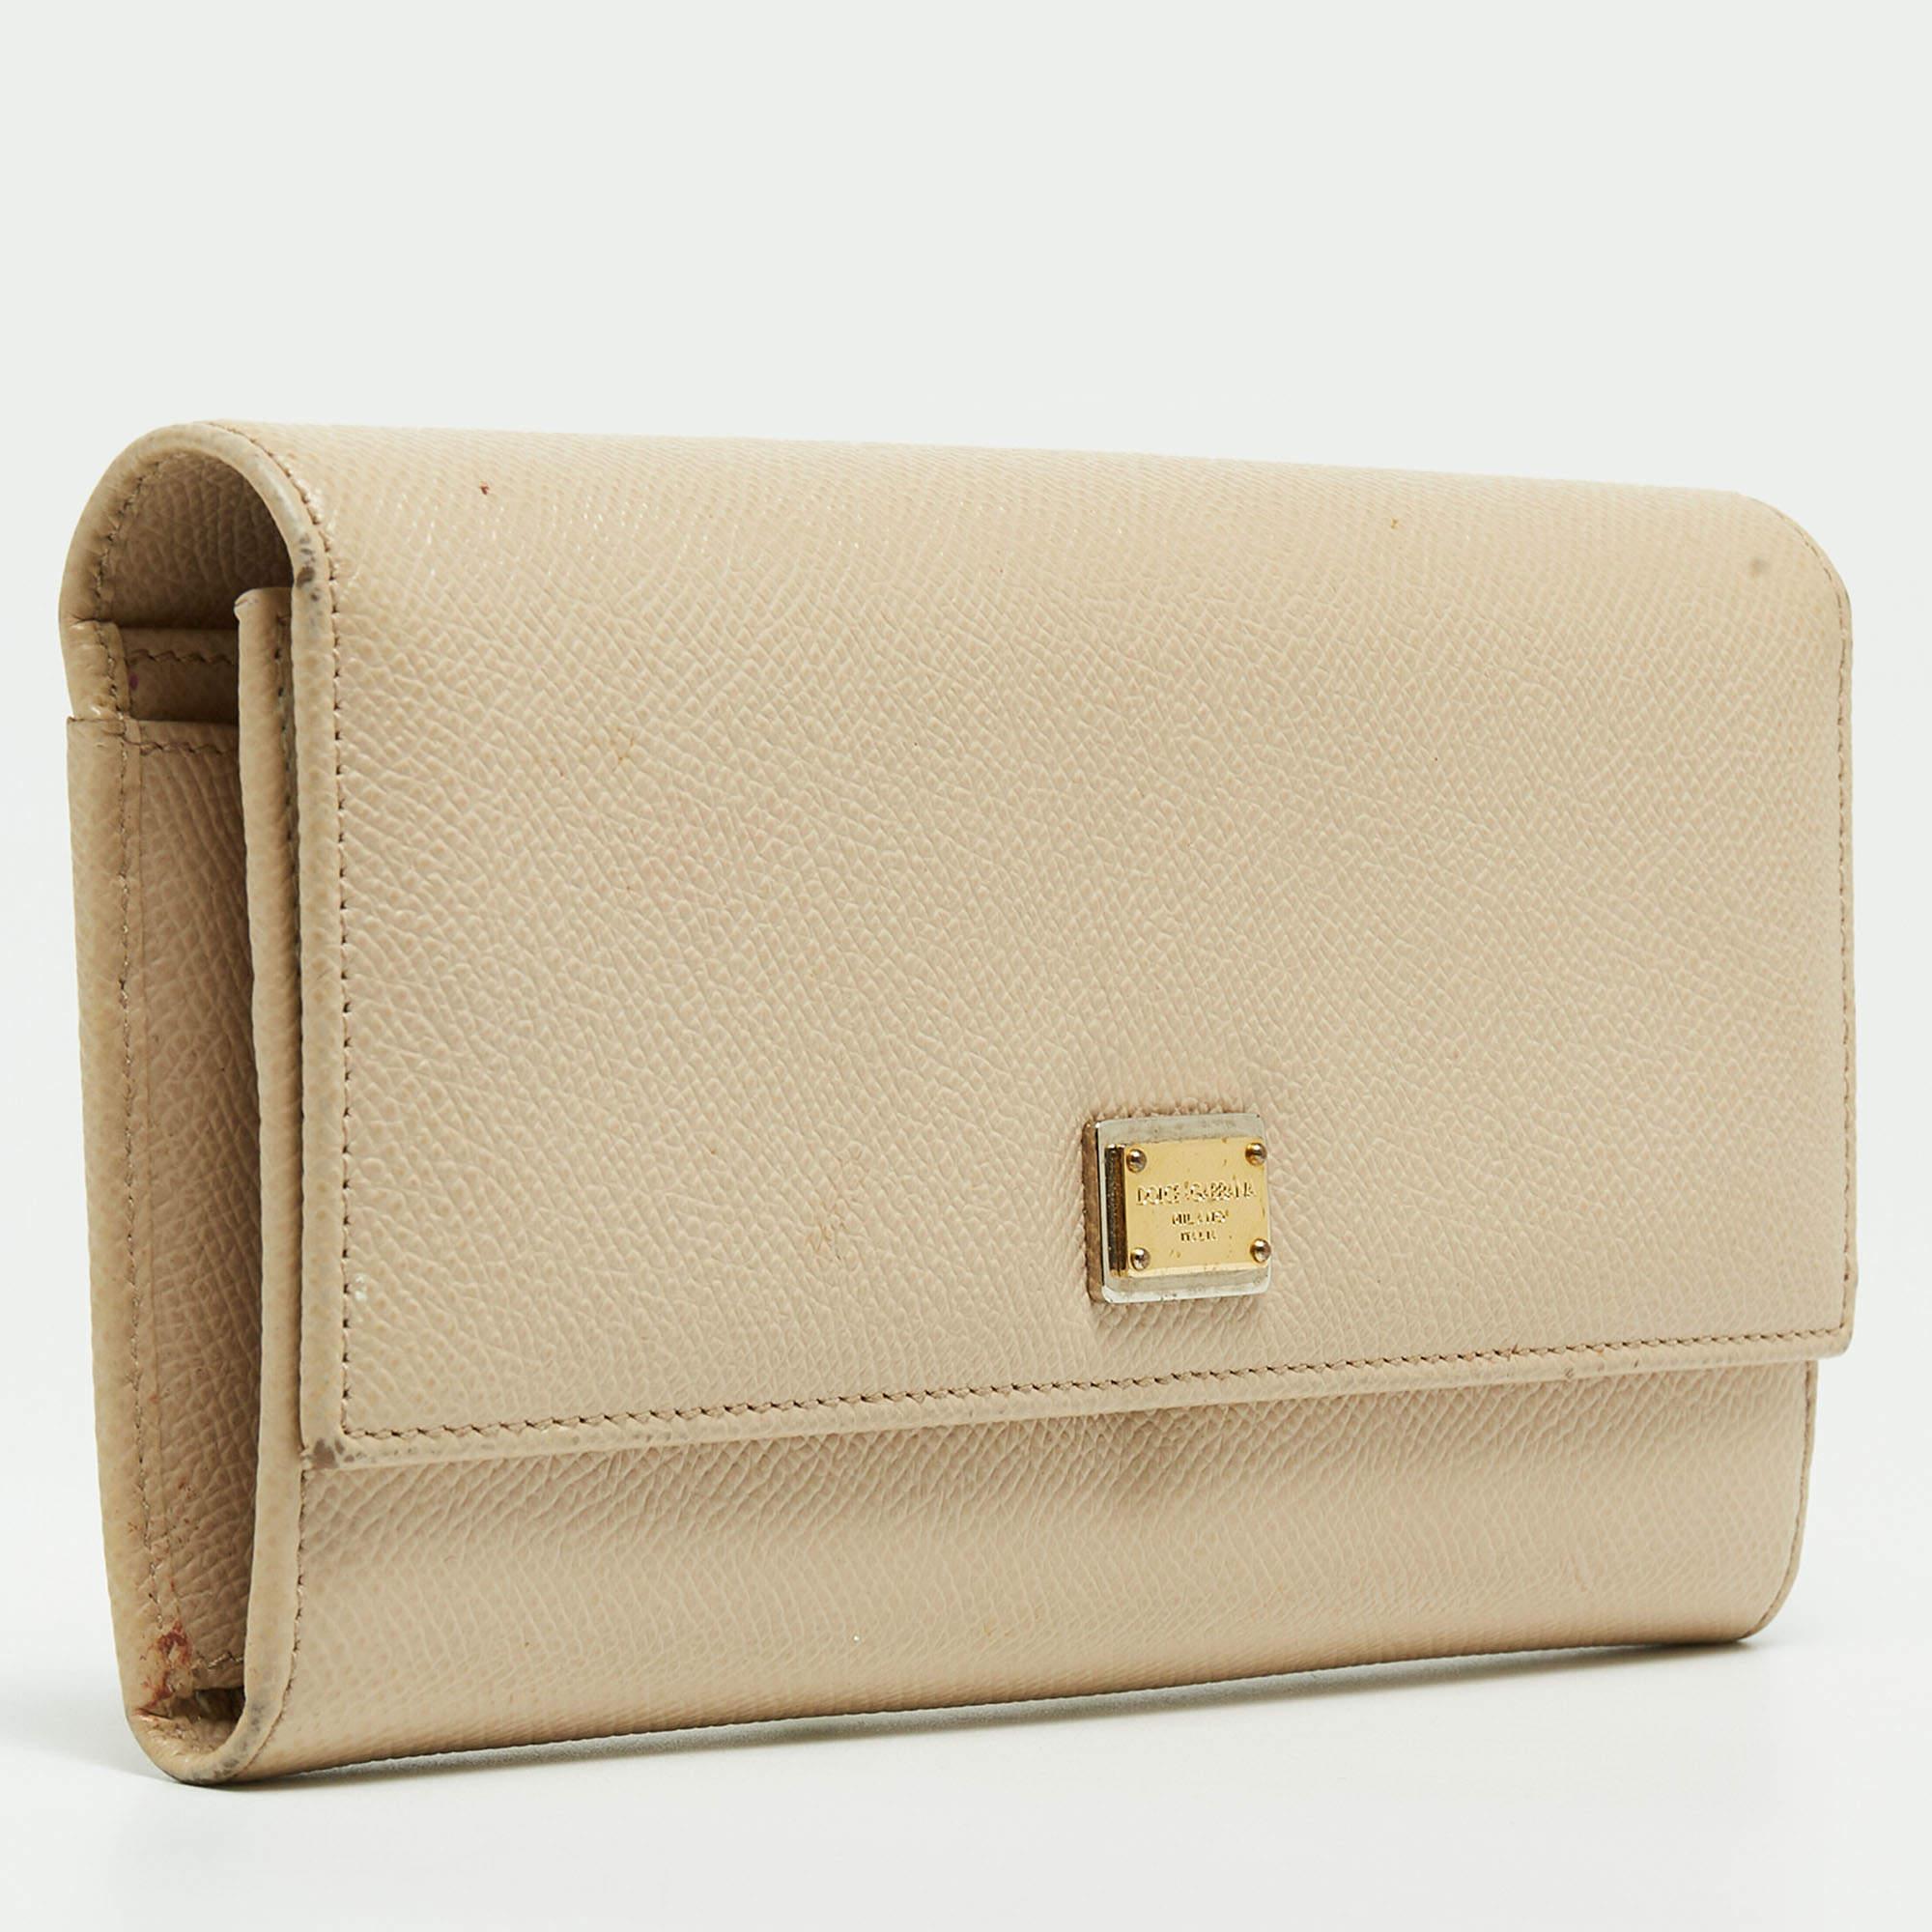 Dolce & Gabbana Beige Leather Dauphine Flap Continental Wallet For Sale 5